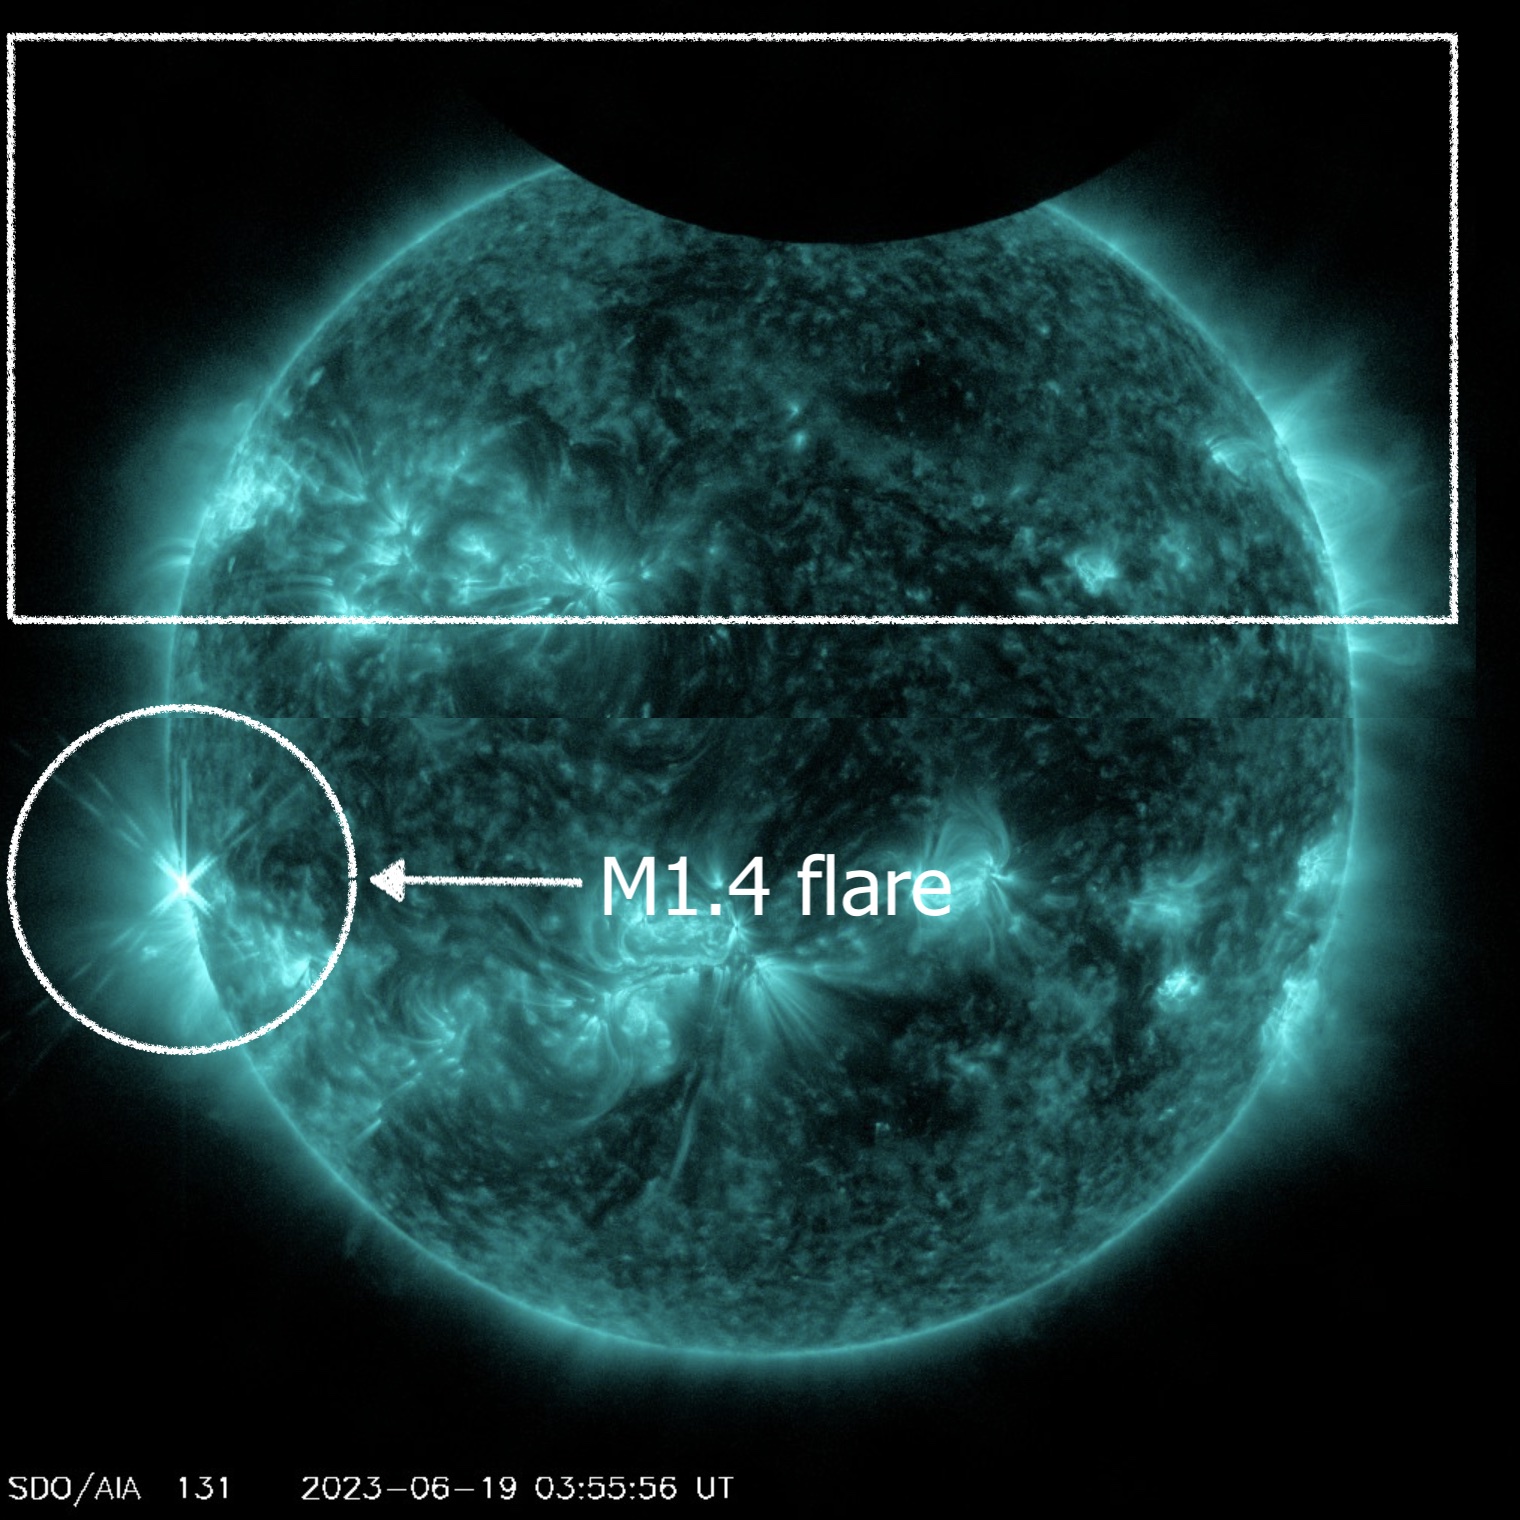 A full teal circle showing a sun with an M flare.